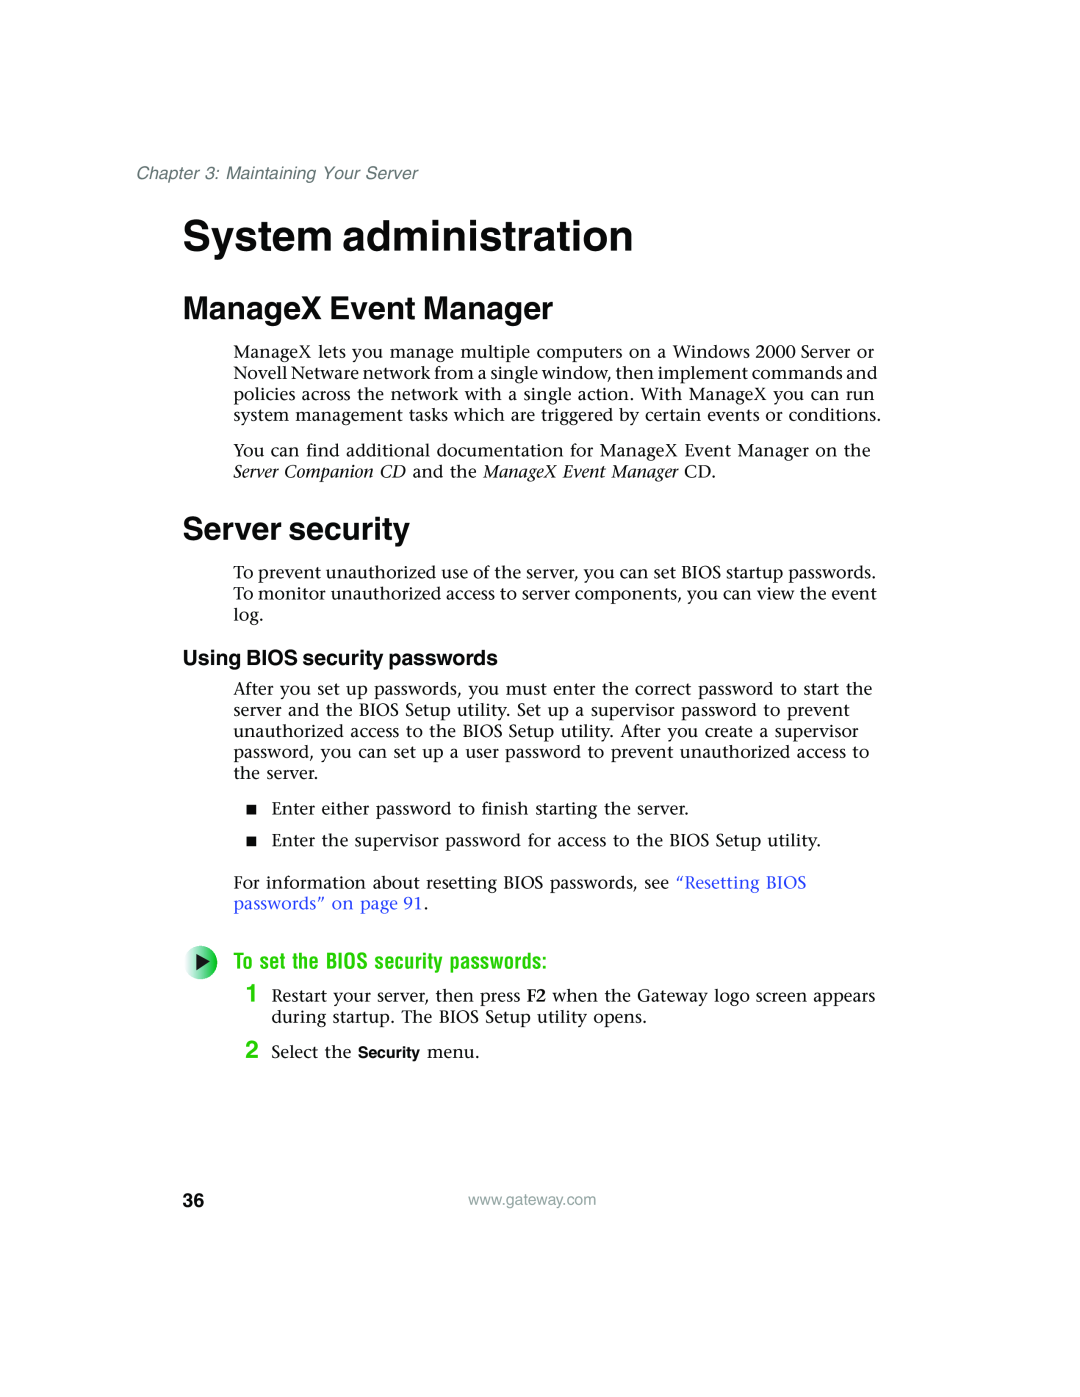 Gateway 960 manual System administration, ManageX Event Manager, Server security, Using BIOS security passwords 